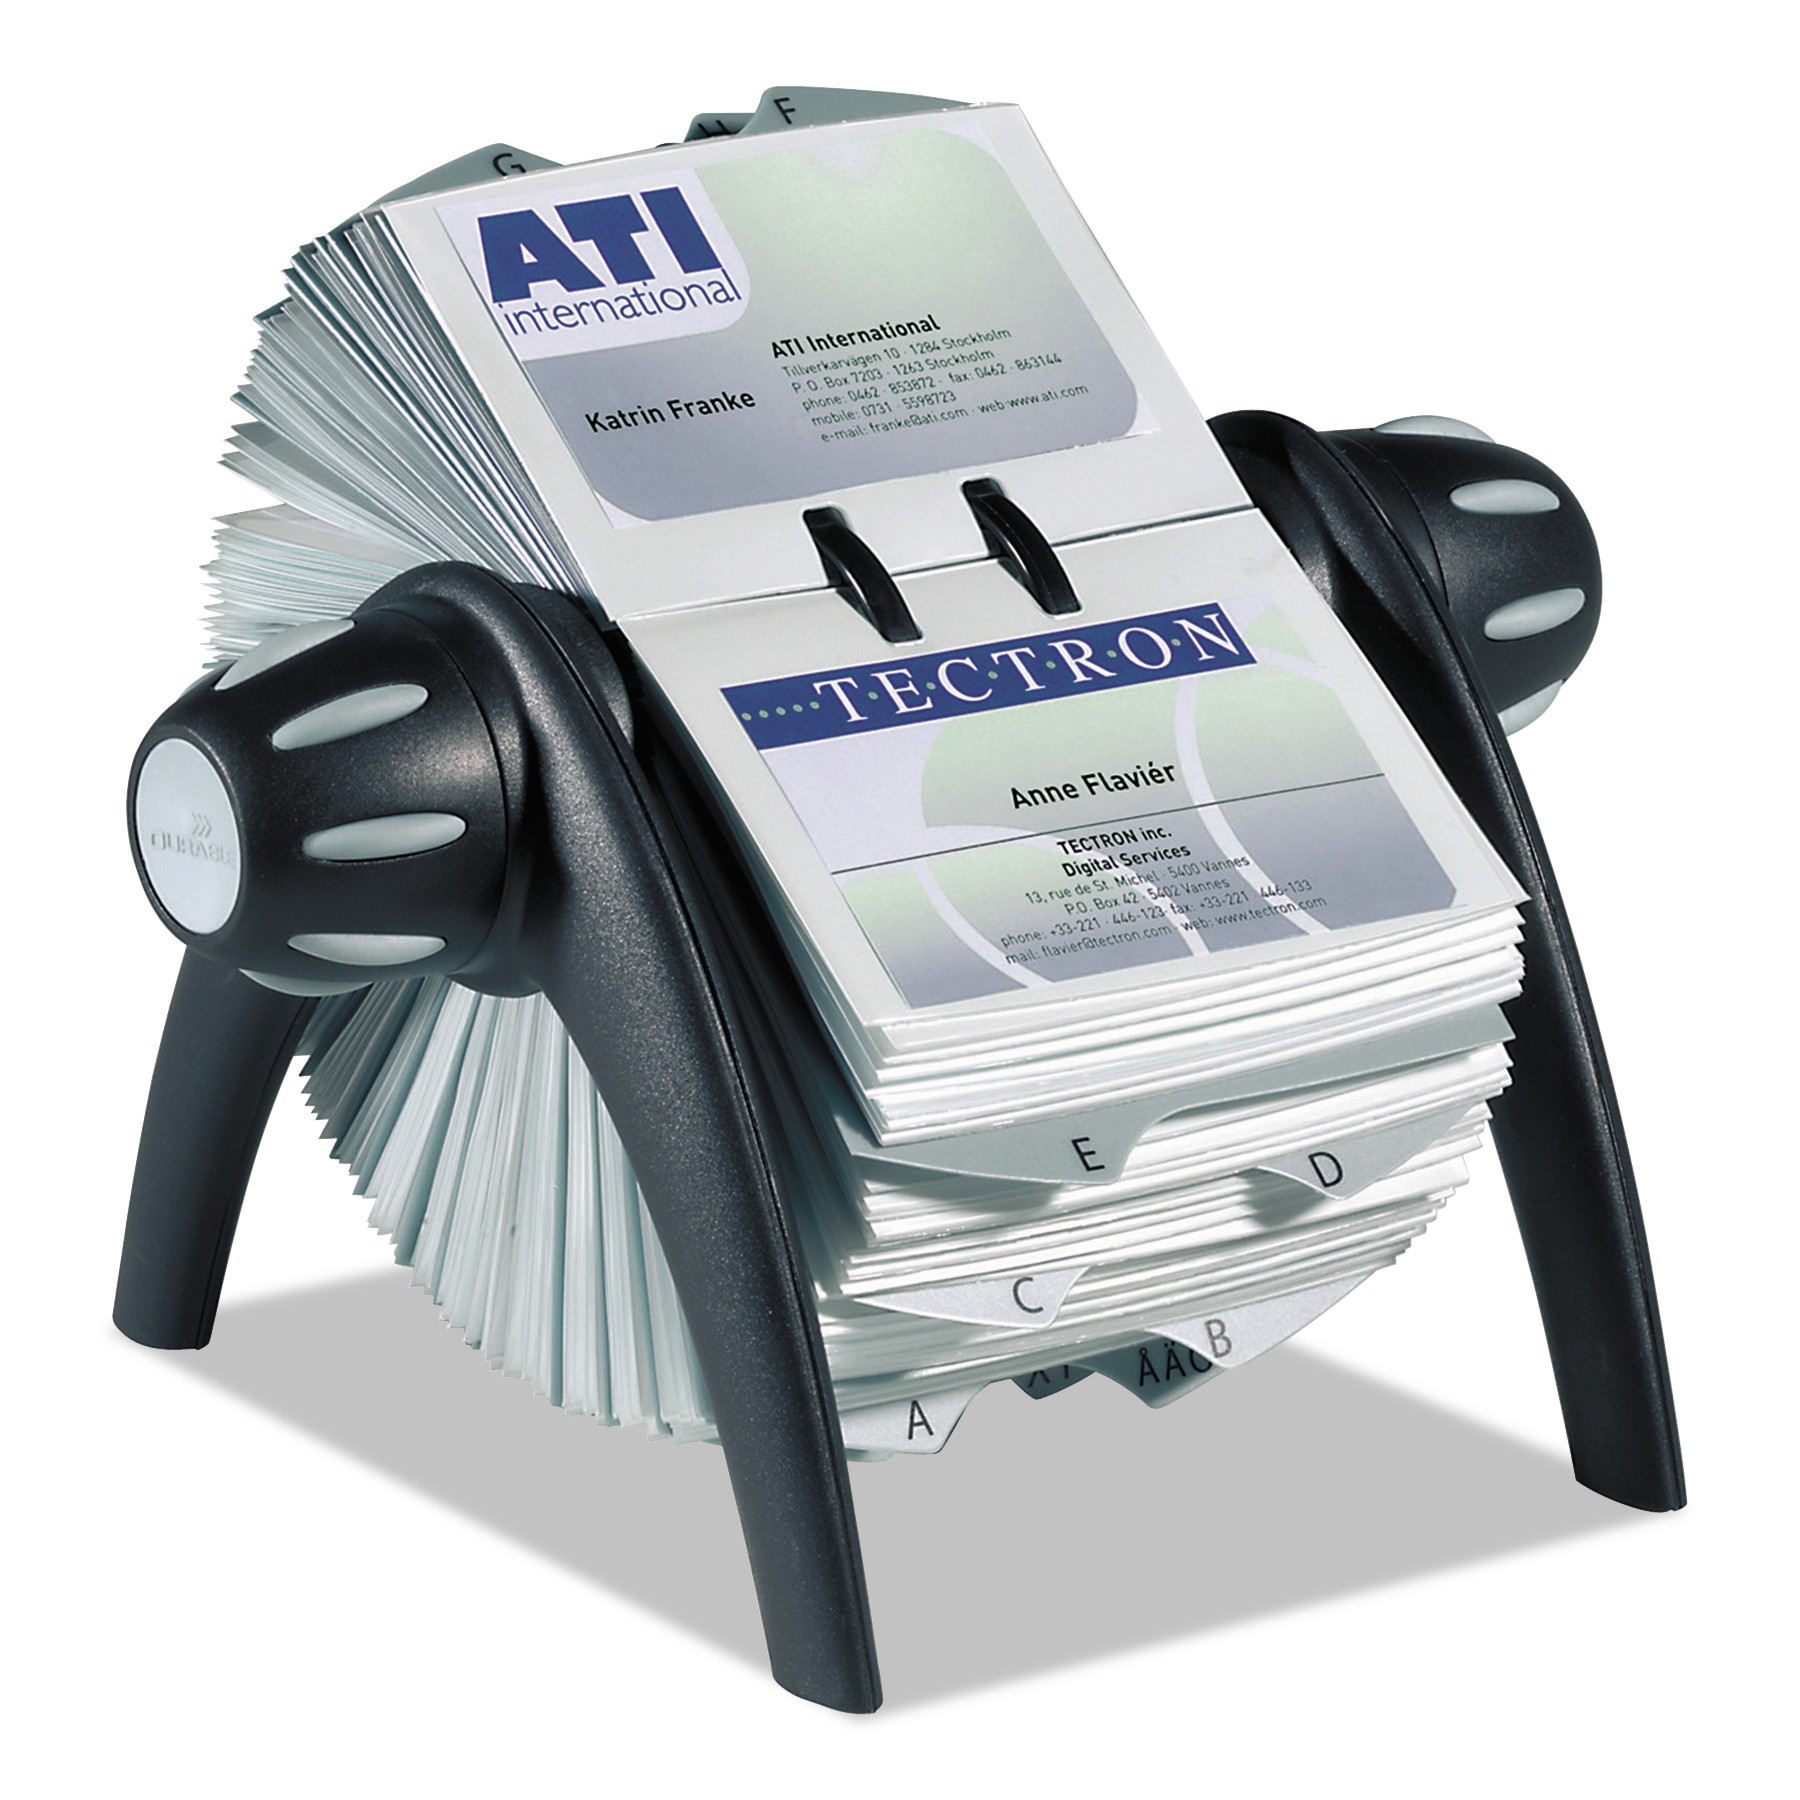 VISIFIX Rotary Business Card File Holds 400 4 1/8 x 2 7/8 Cards, Black/Silver